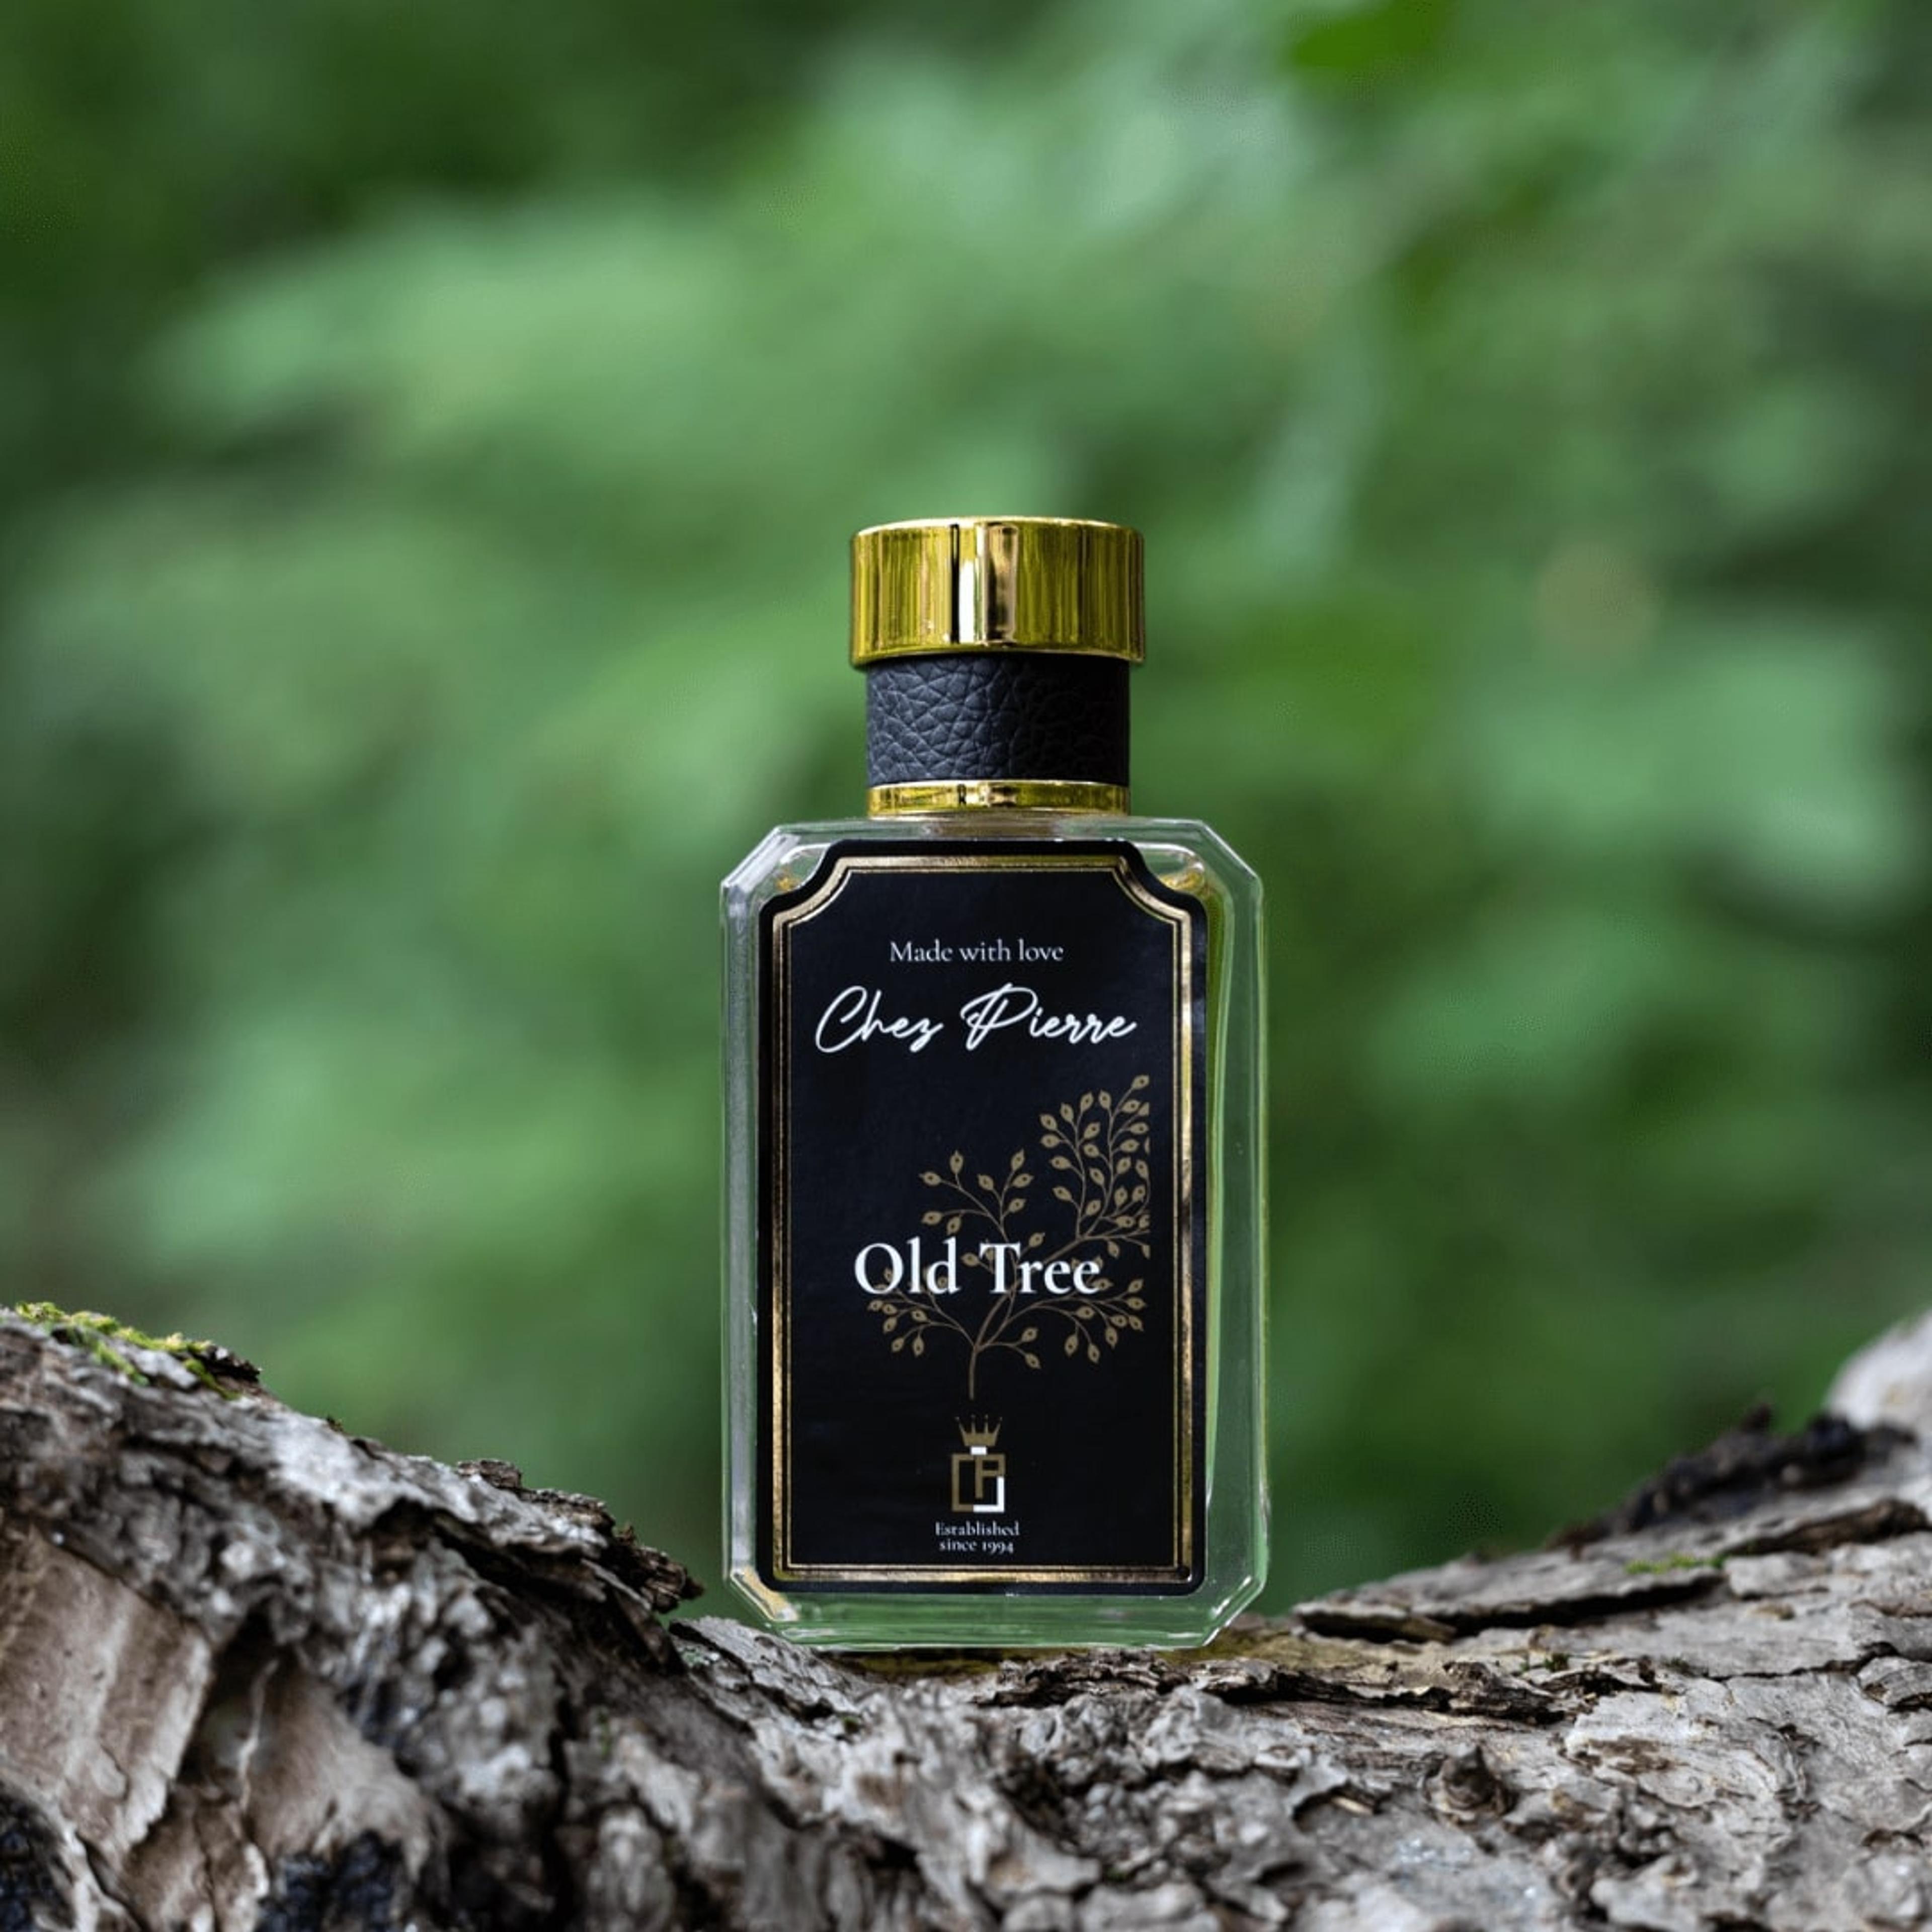 Chez Pierre's Old Tree Perfume Inspired By Oud Wood